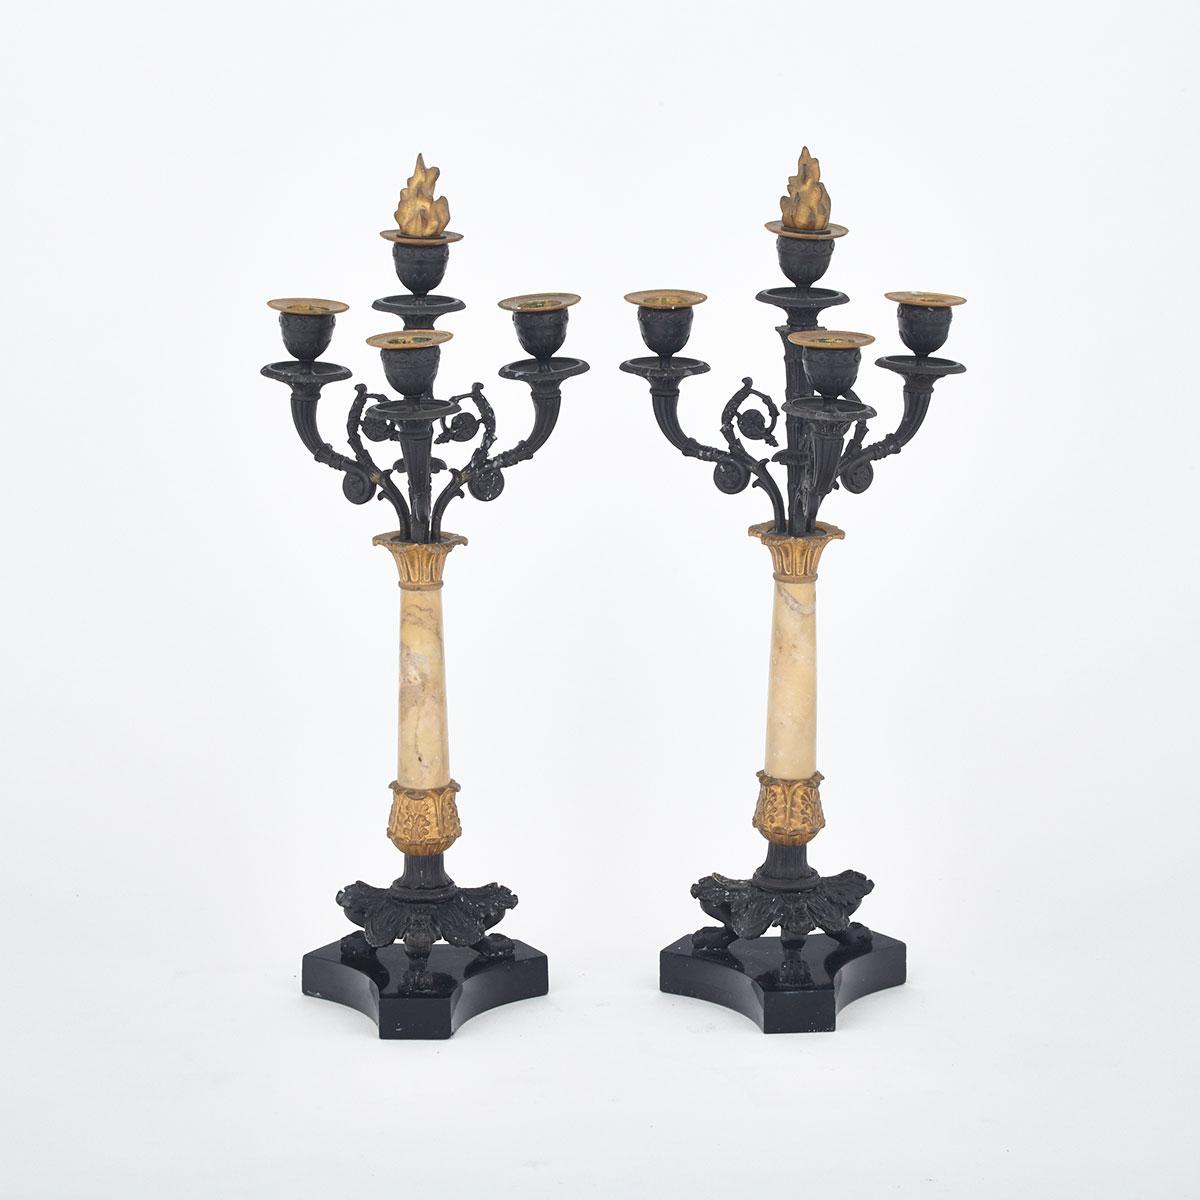 Pair of French Empire Patinated and Gilt Bronze and Siena Marble Four Light Candelabra, c.1820